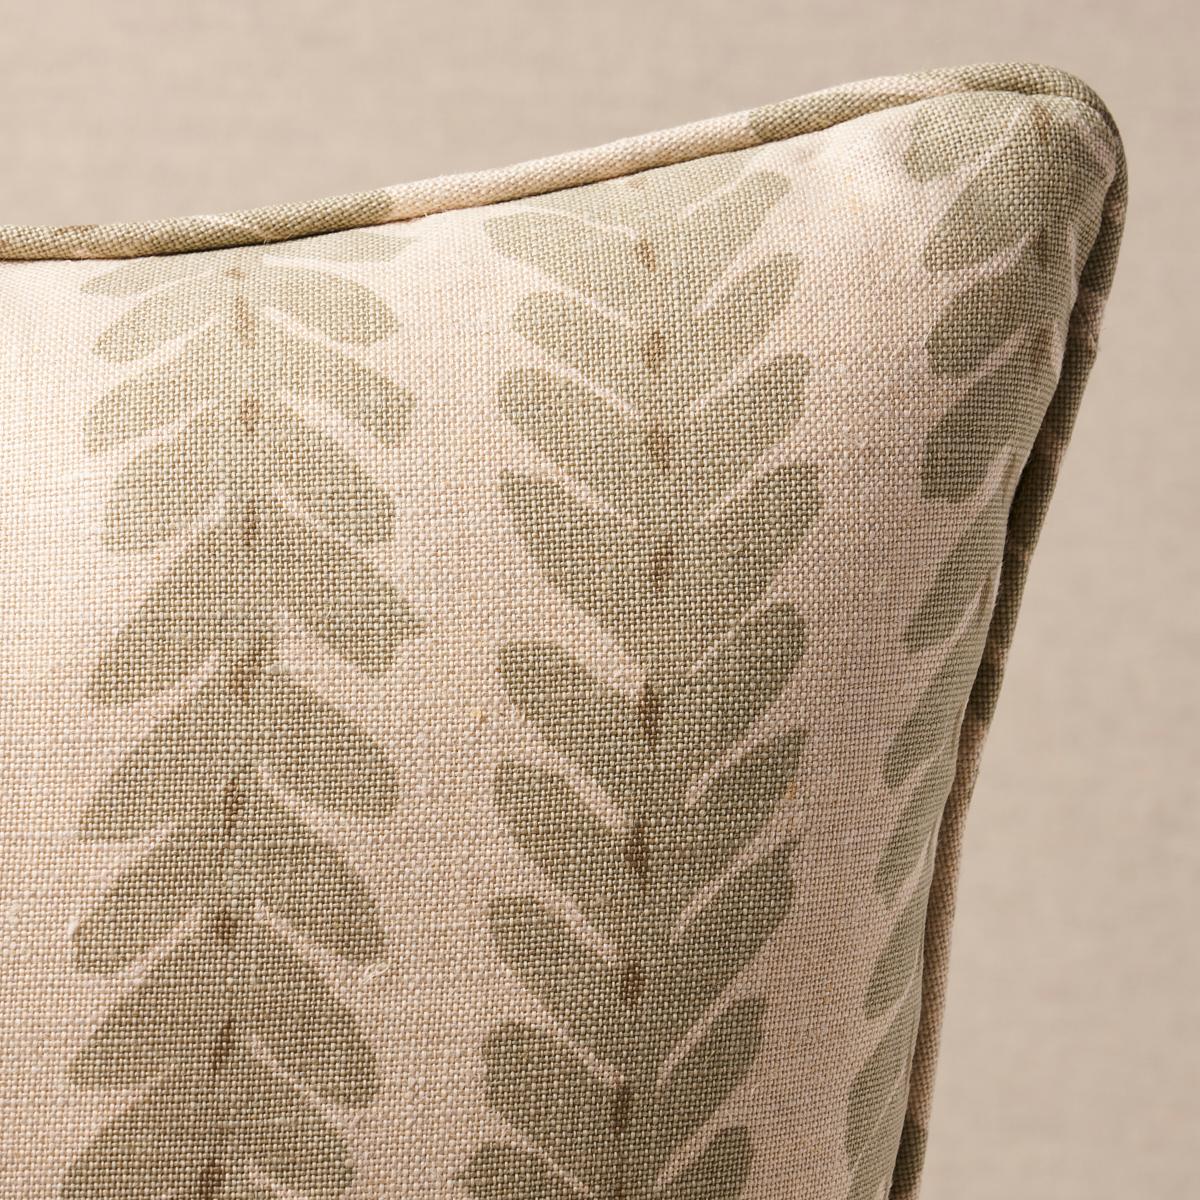 This pillow features Woodperry by Veere Grenney for Schumacher with a self welt finish. Classic yet modern, Woodperry is an updated take on a botanical stripe. Woven in England, the natural linen ground gives this artful, leafy pattern subtlety and